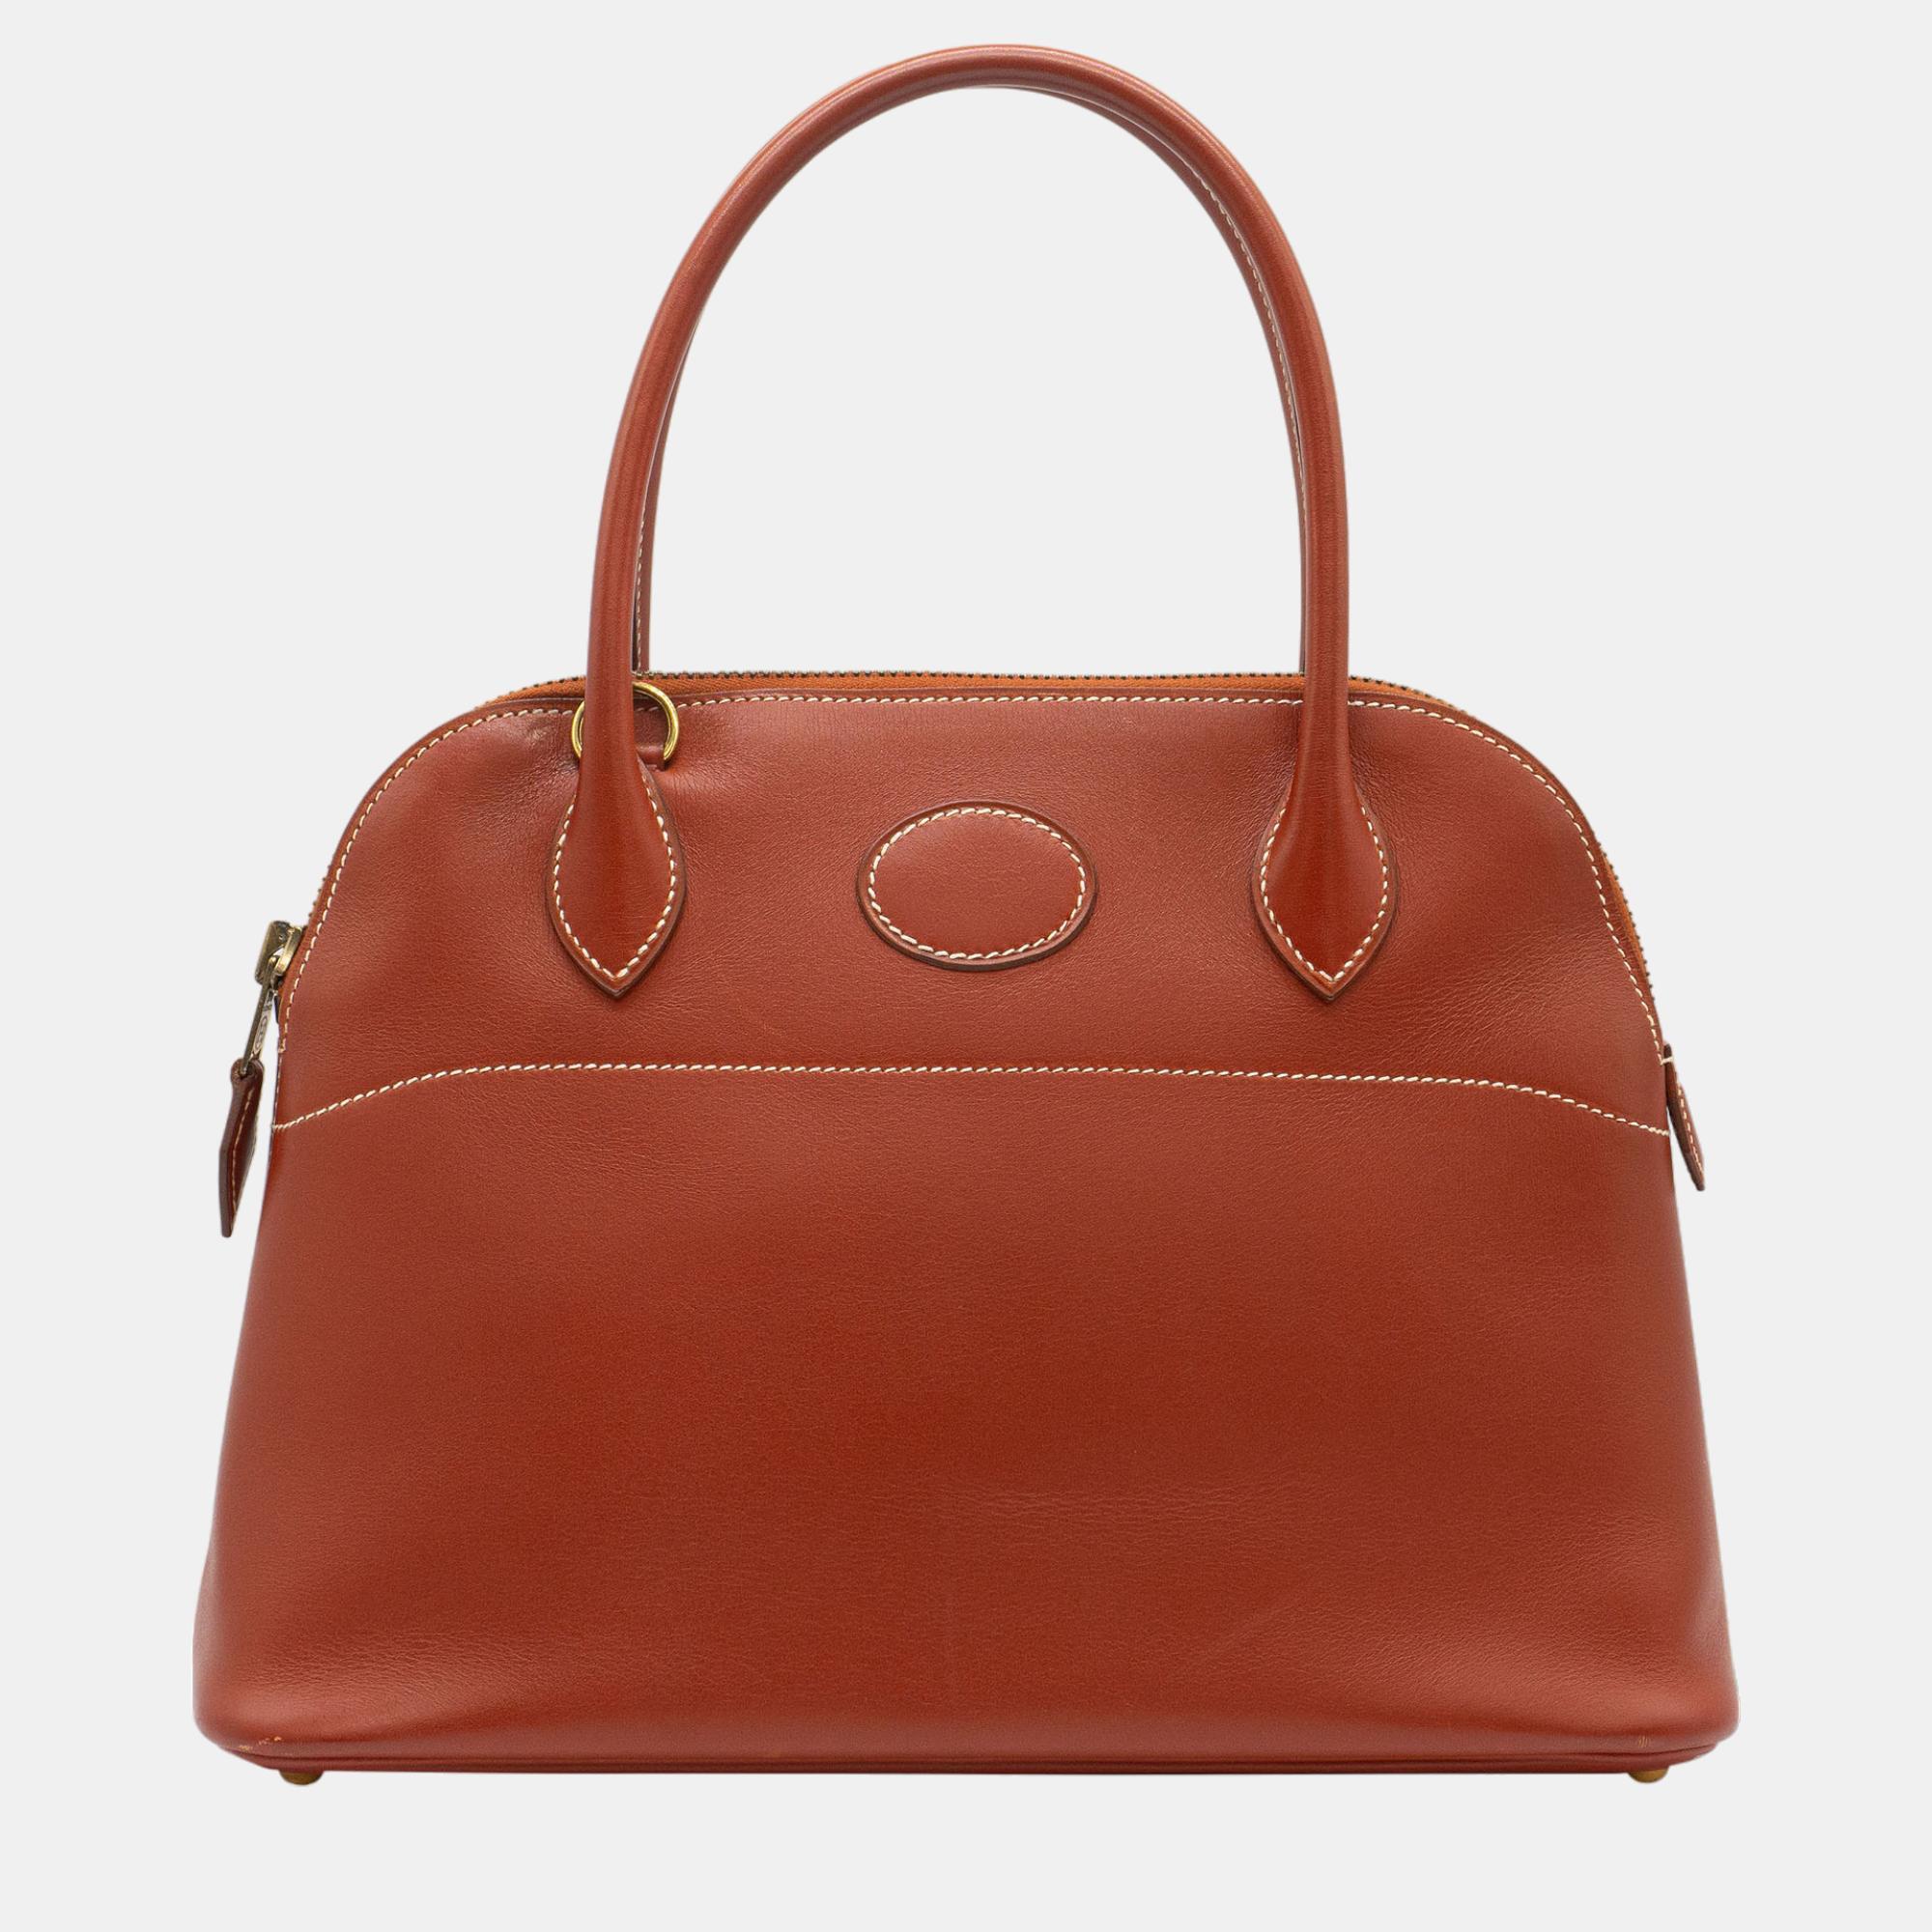 

Hermès Vintage Bolide 27 in Brique Box Leather with GHW Bag, Brown